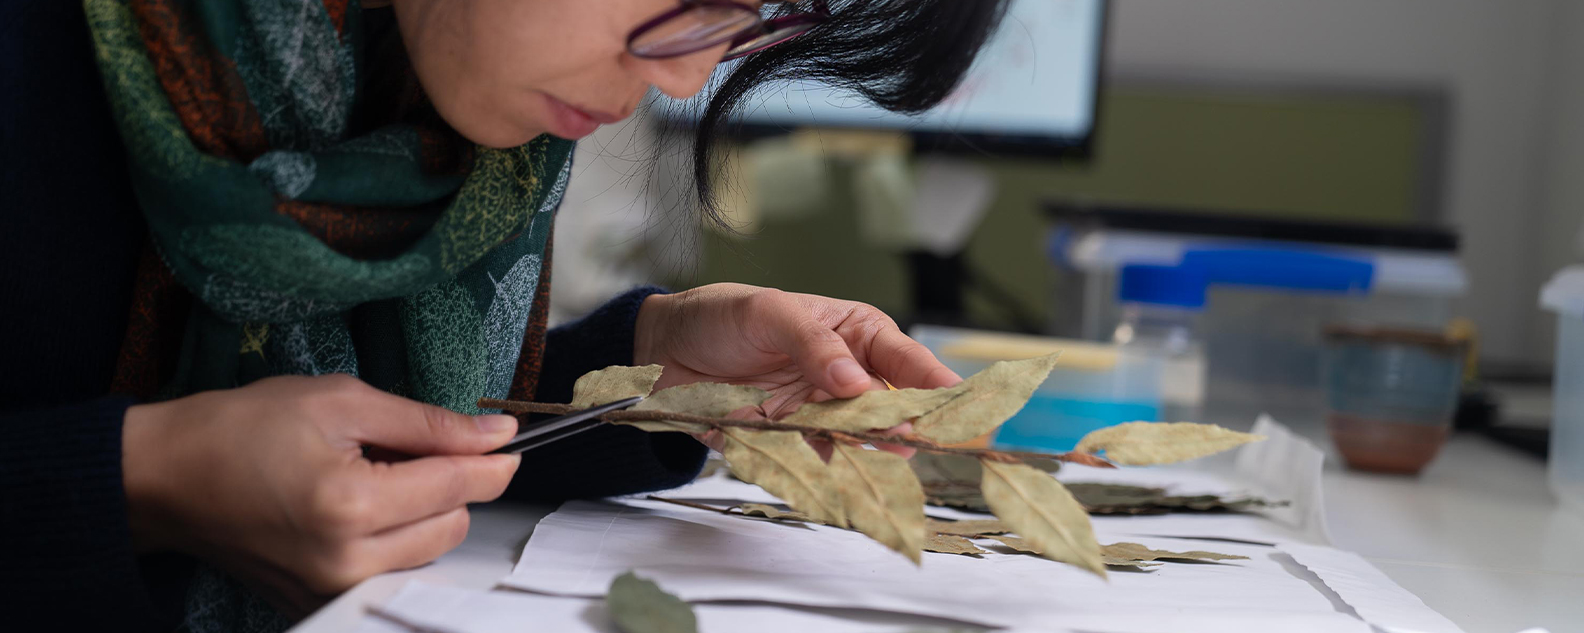 Scientist examines dried and pressed plant specimens